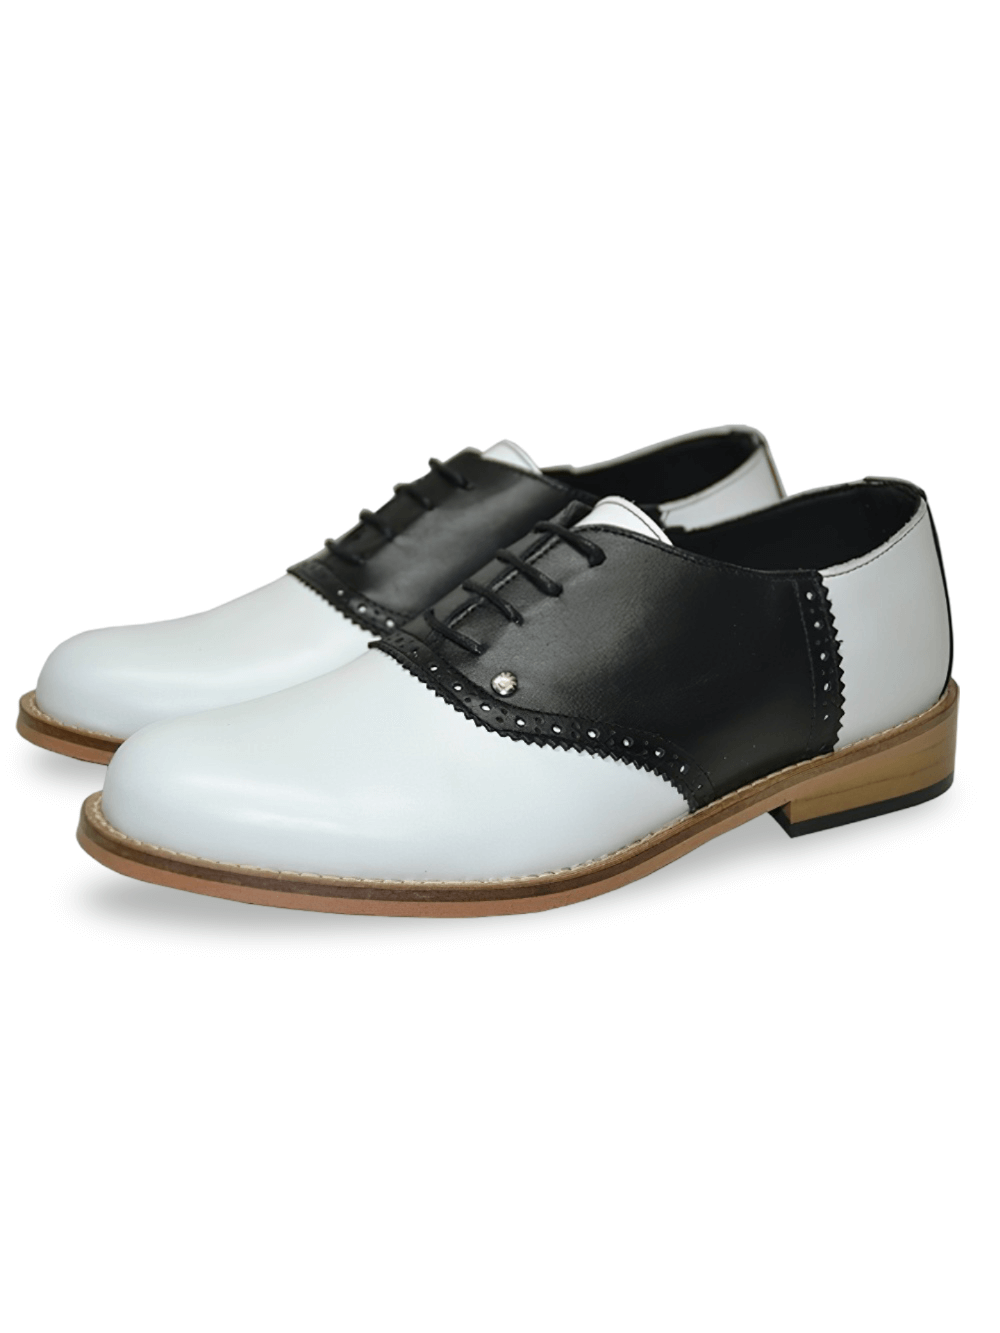 Unisex Lace-Up Flat Bowling Shoes in Grained Leather